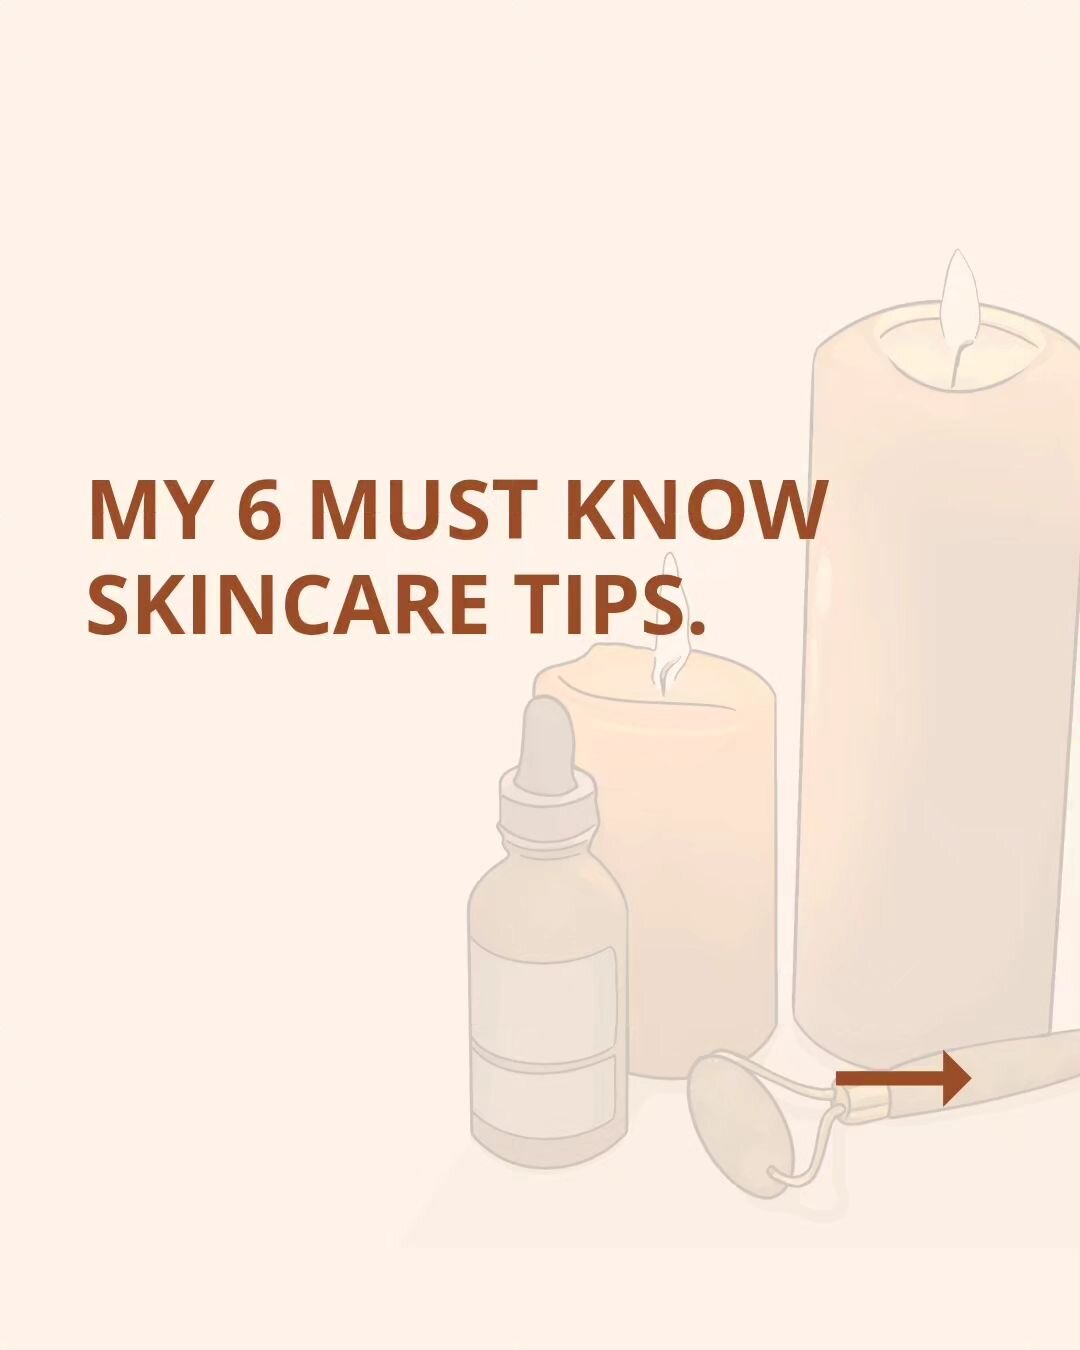 You'll want to save this post. It's a good one! From remaining patient to the importance of at-home product consistency, above are a few of my top skincare tips. I'd love to know yours. Share them below! 👇✨